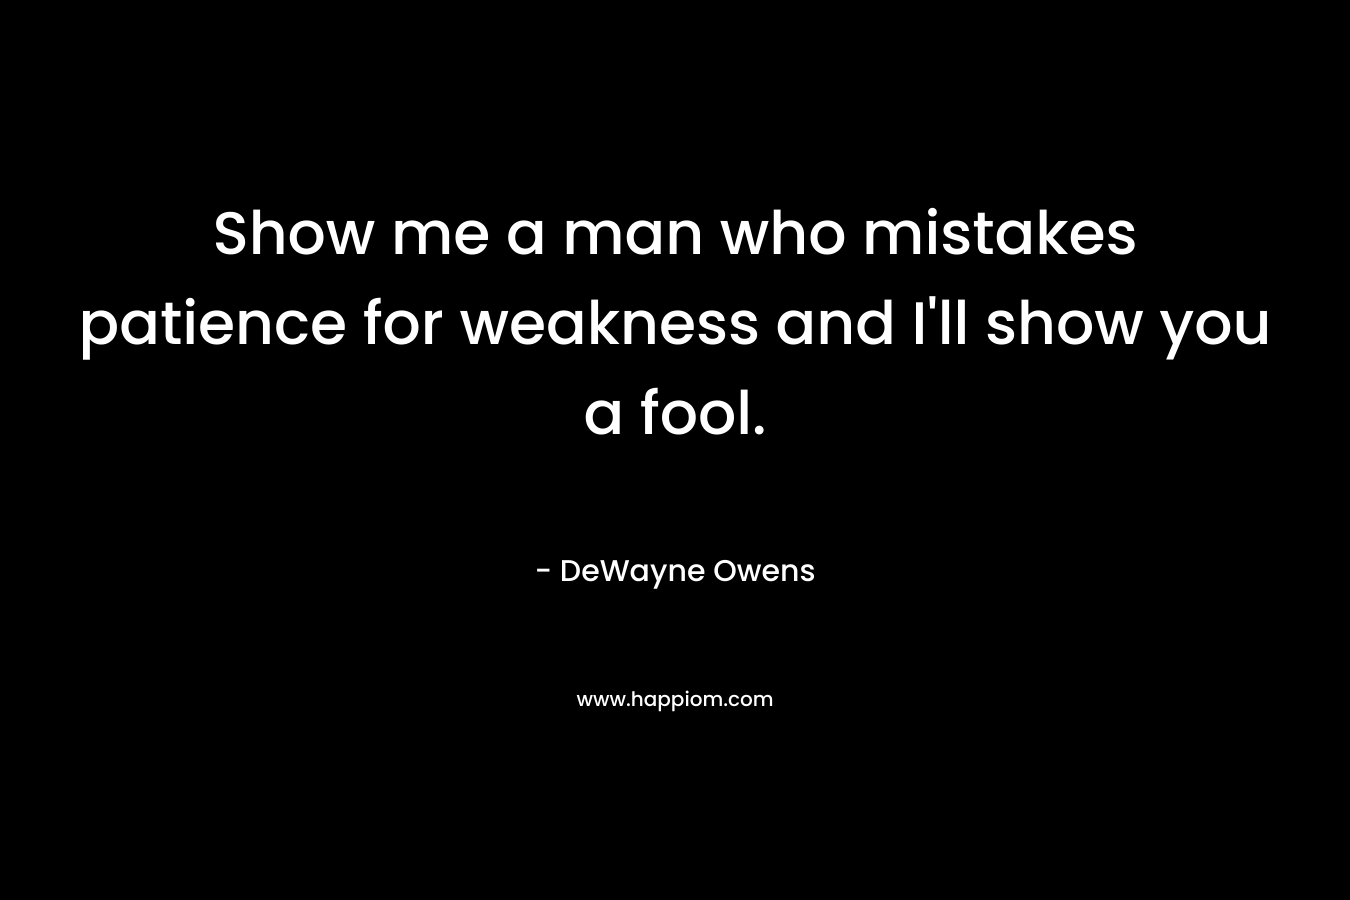 Show me a man who mistakes patience for weakness and I’ll show you a fool. – DeWayne Owens